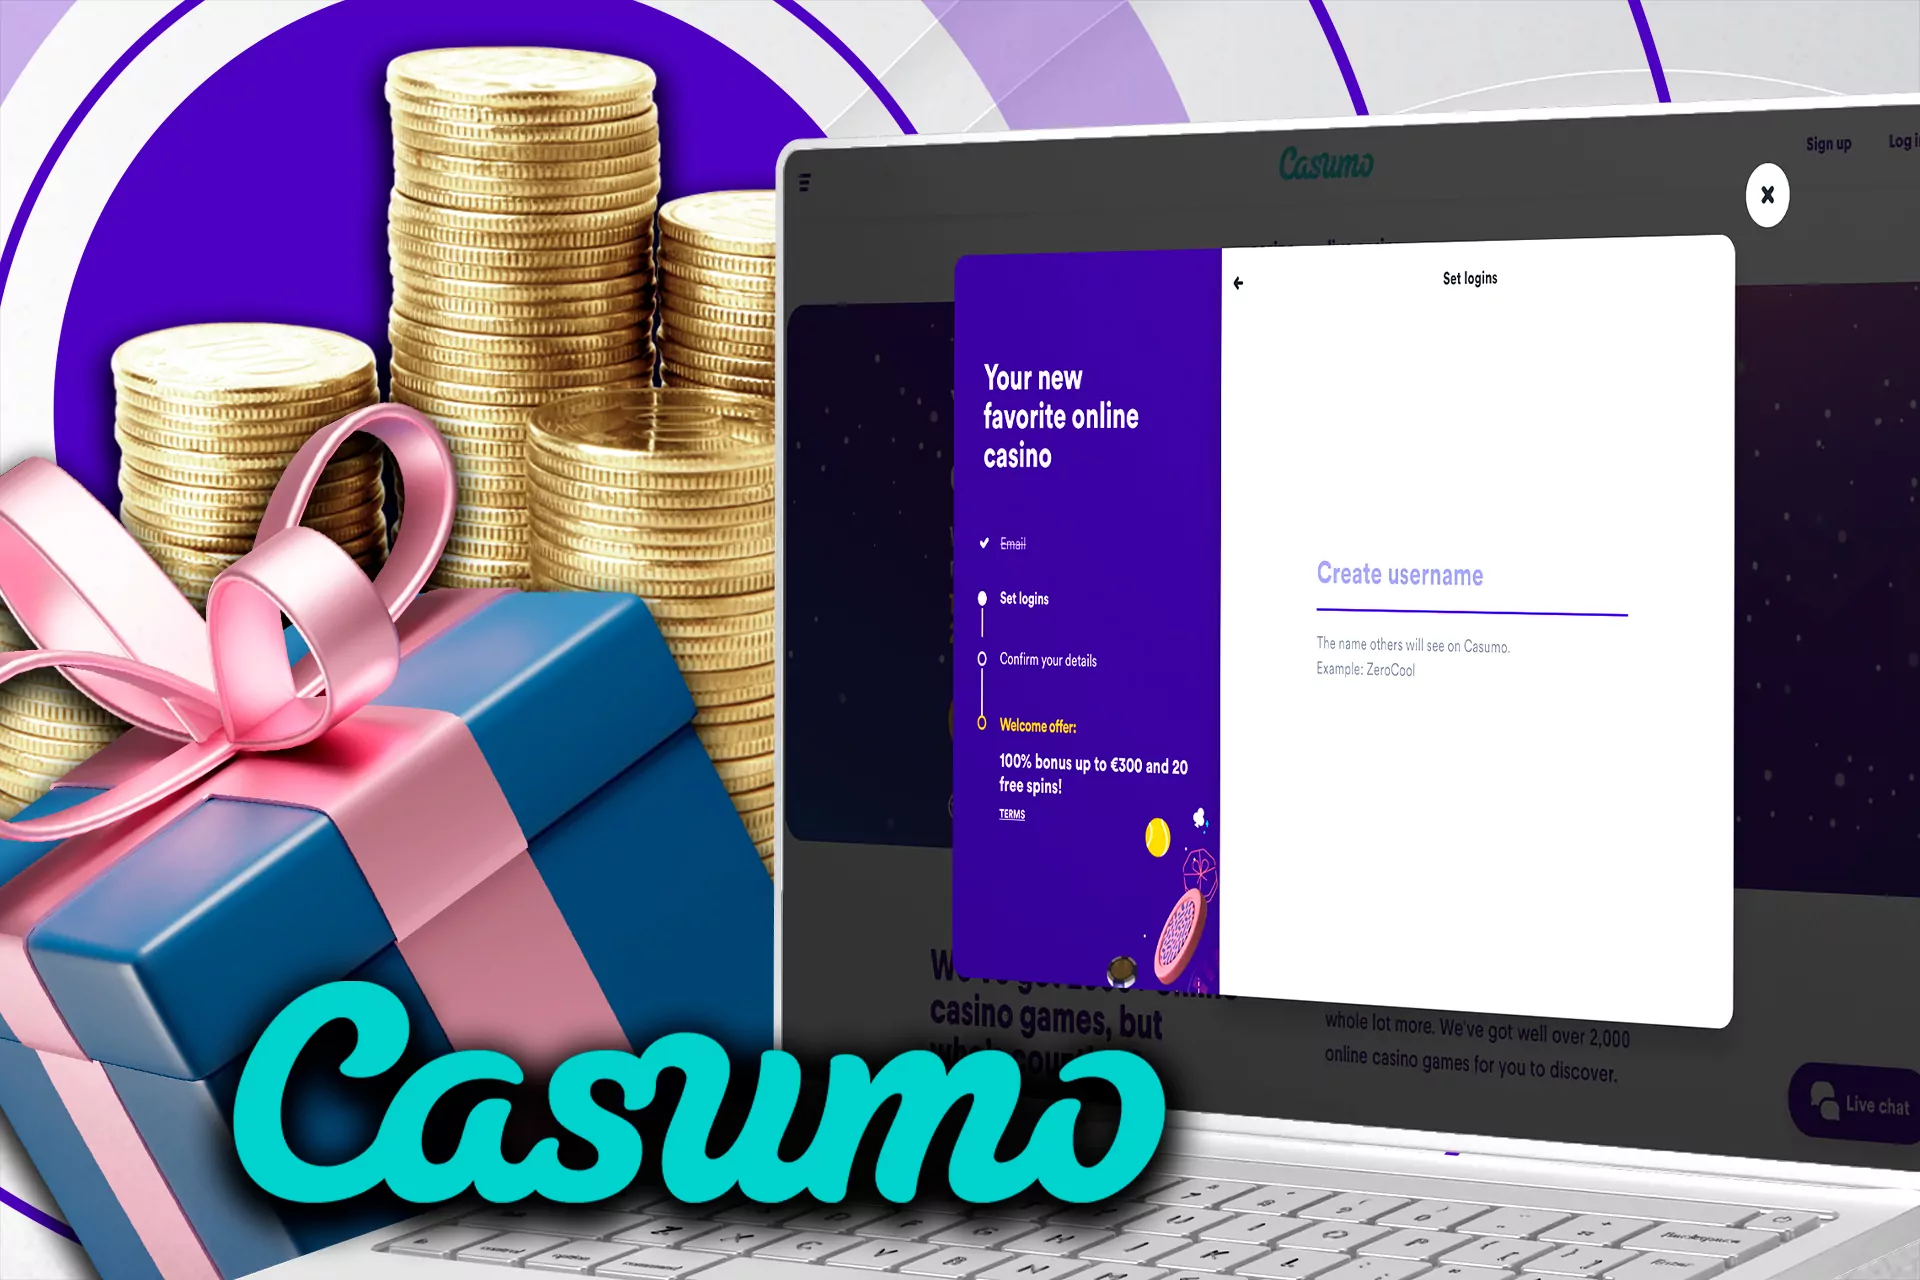 If you don't have an account at the Casumo site yet, you can choose a welcome bonus during registration.